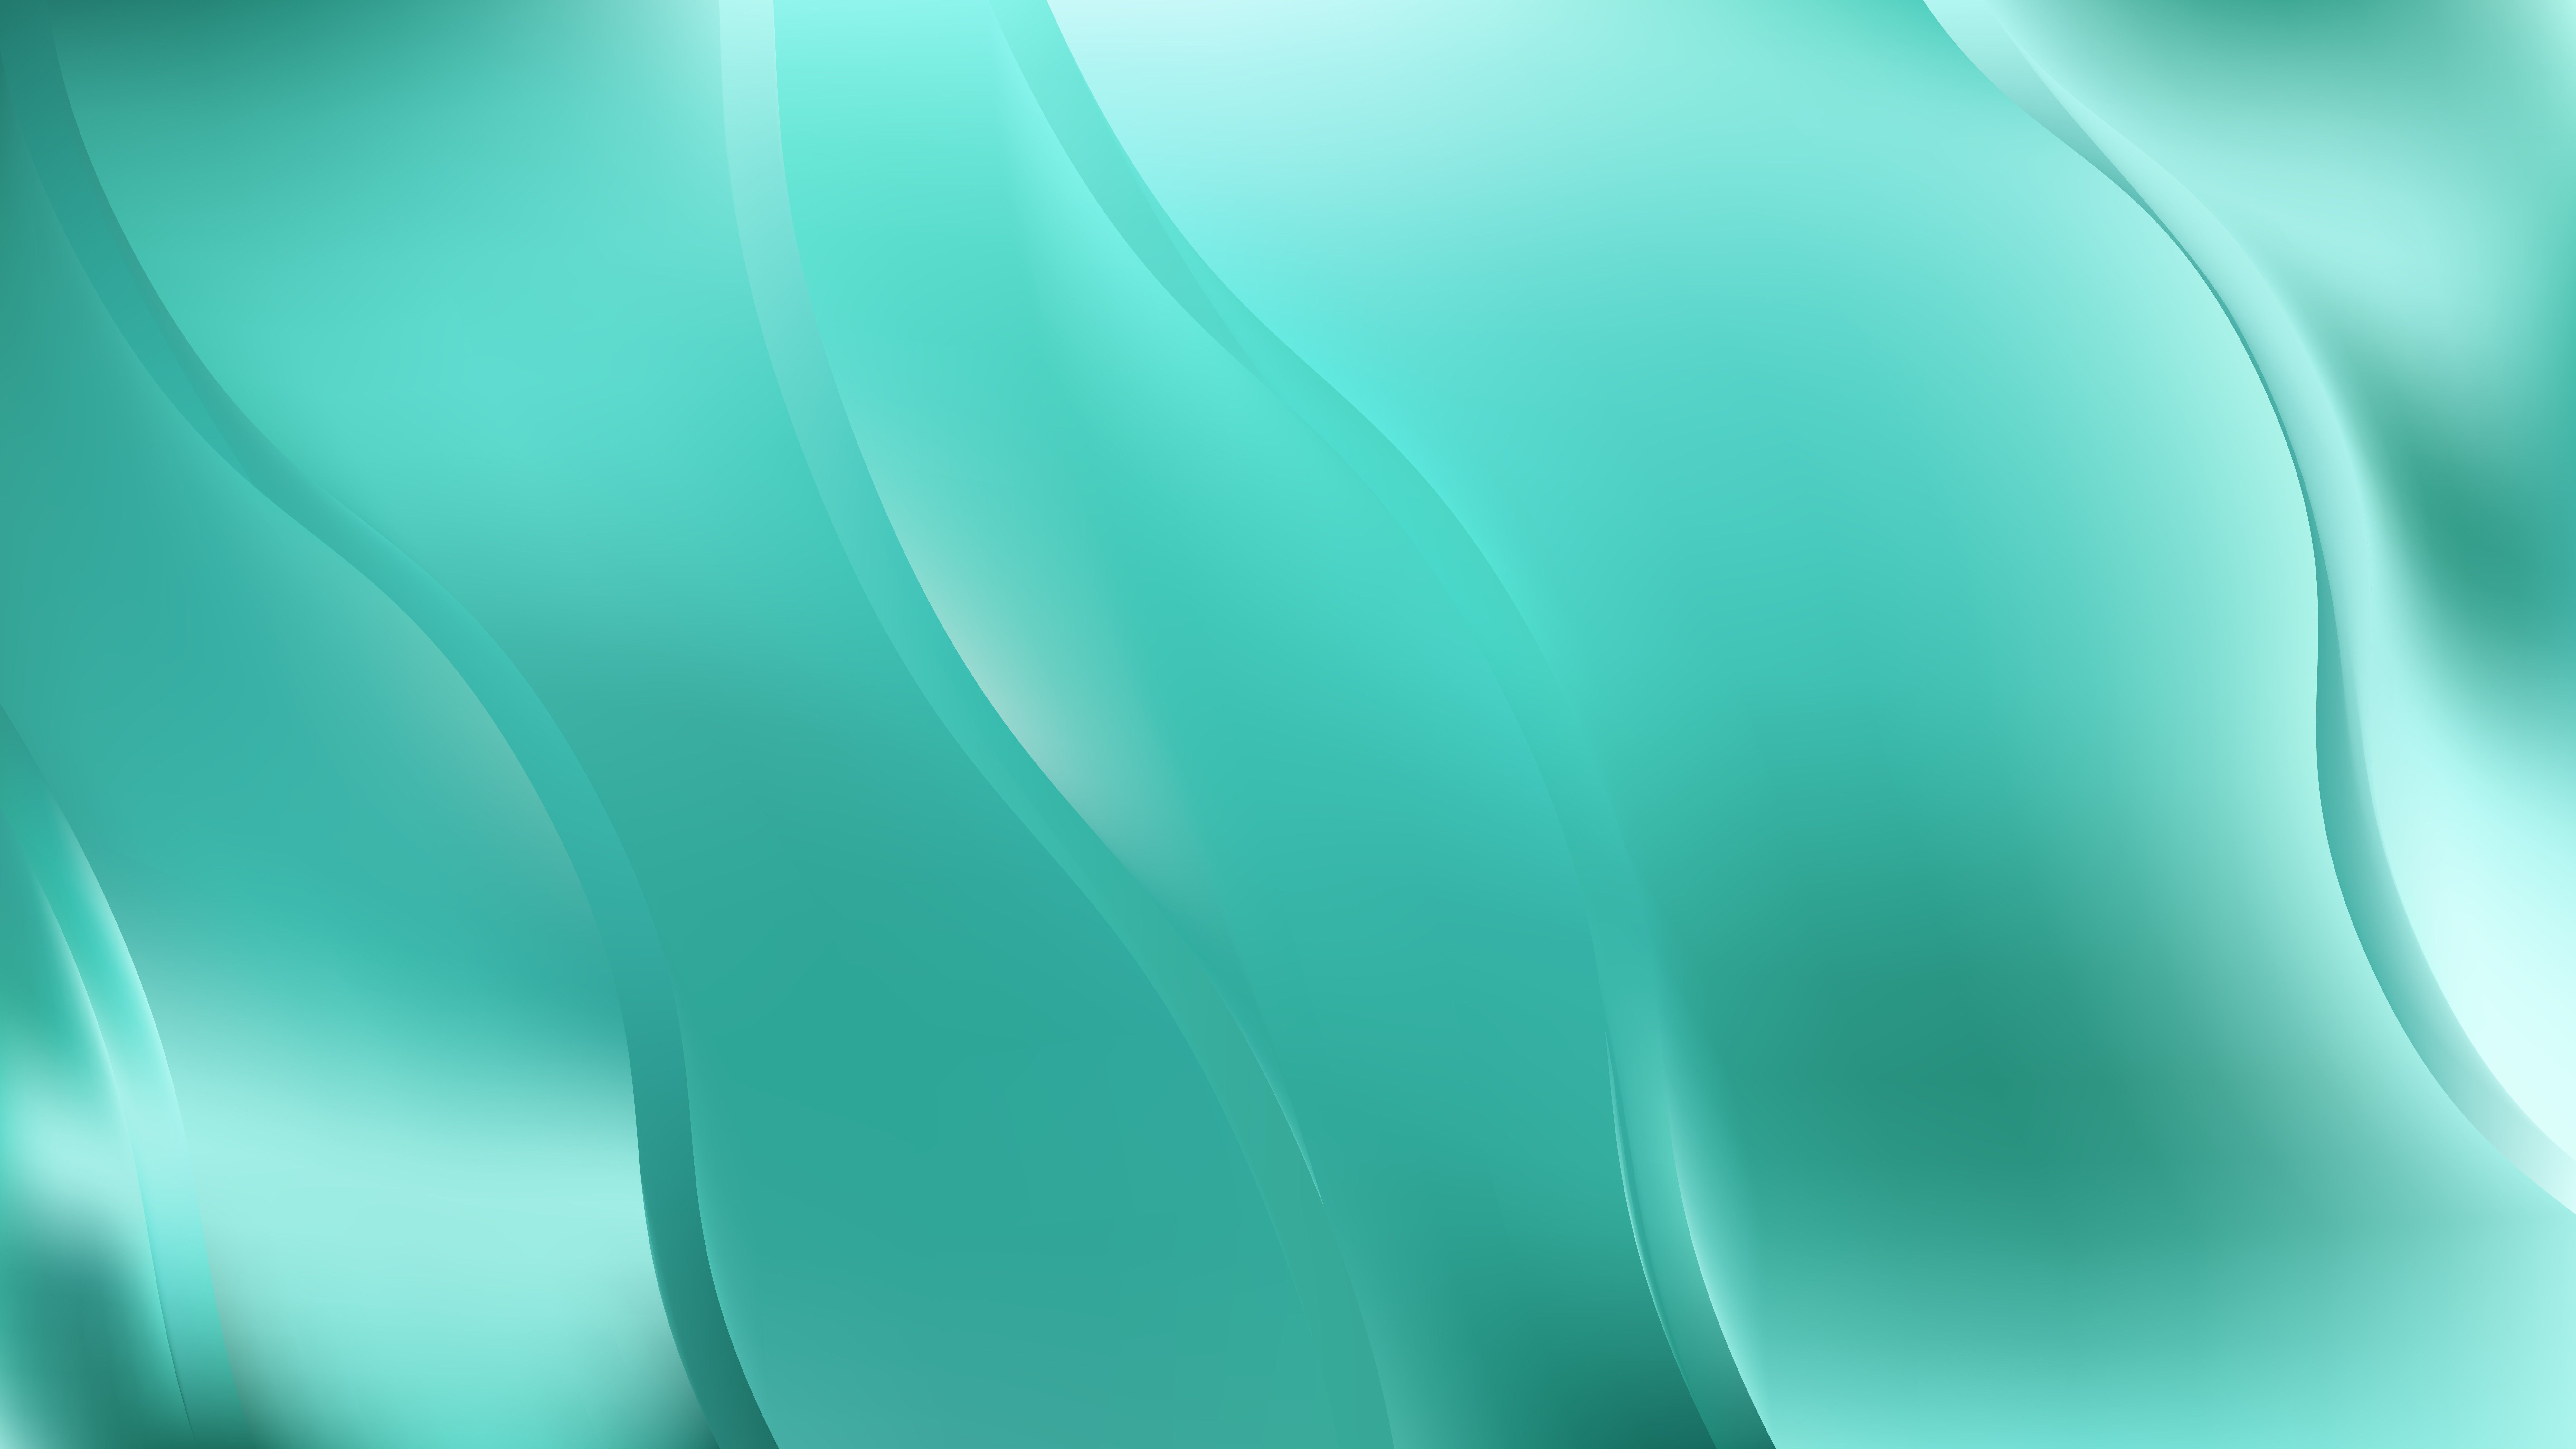  Mint Green Abstract Curve Background 8000x4500